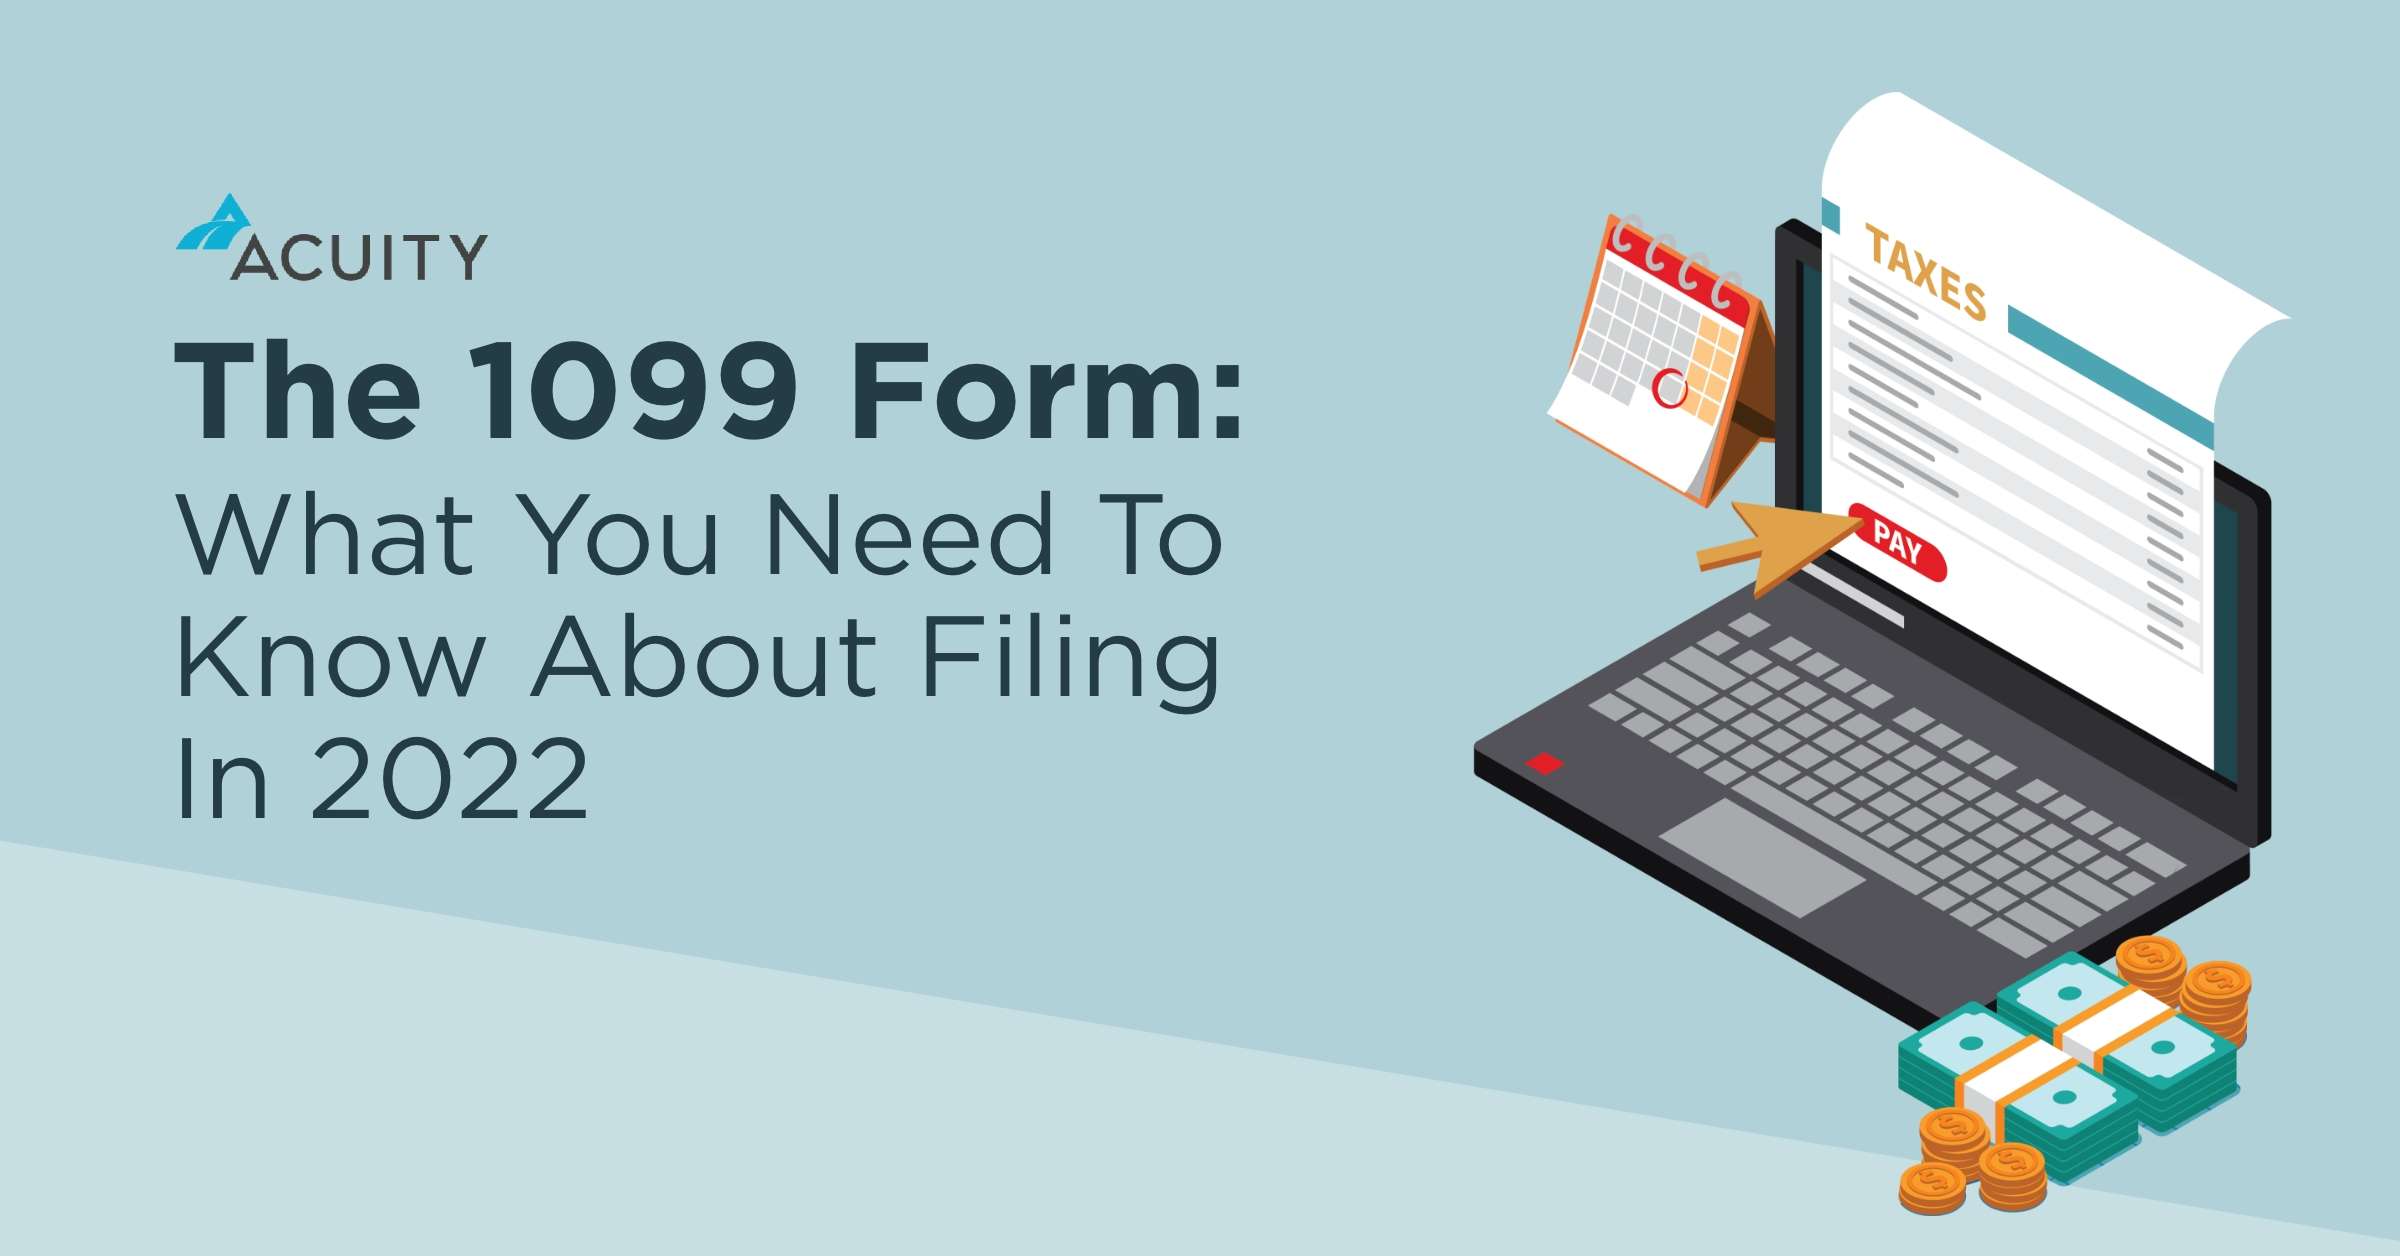 The 1099 Form: What You Need To Know About Filing In 2022